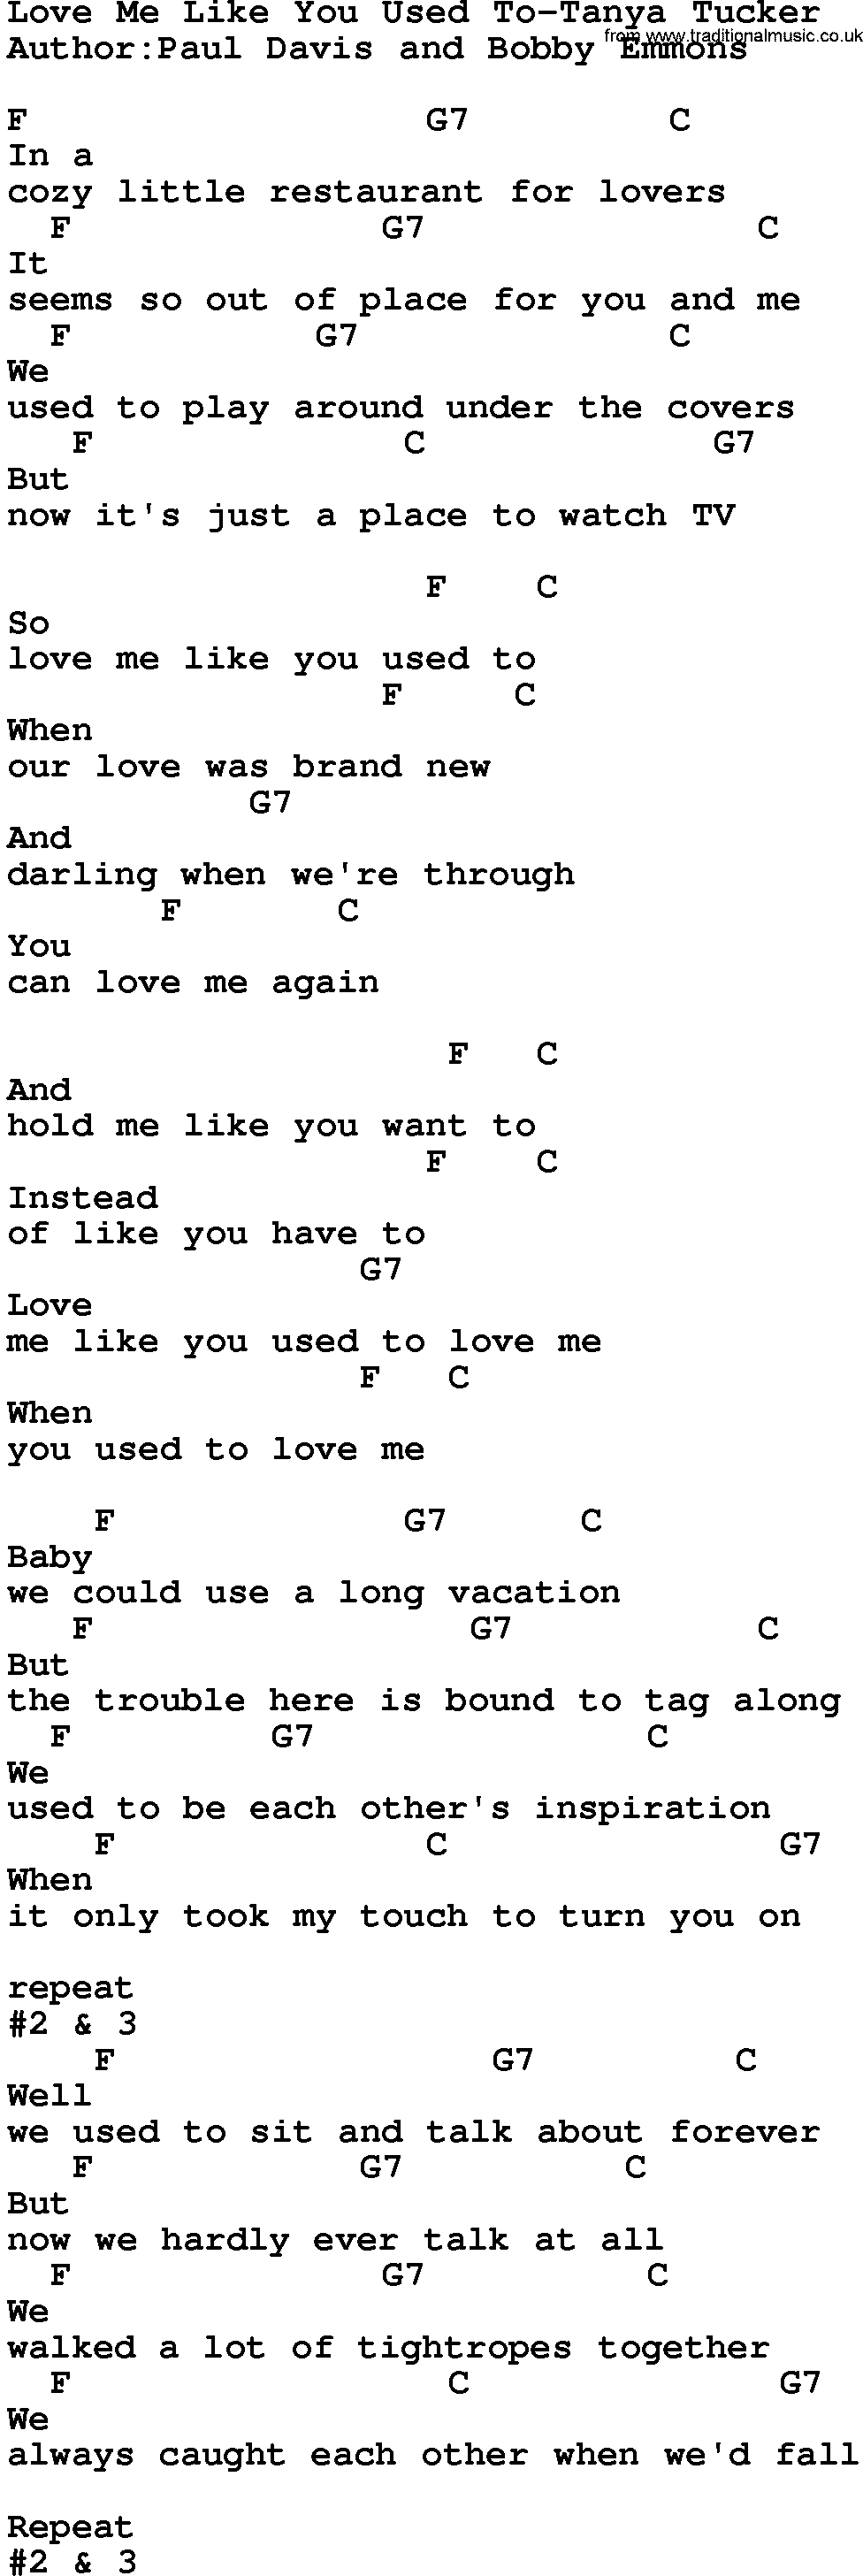 Country music song: Love Me Like You Used To-Tanya Tucker lyrics and chords